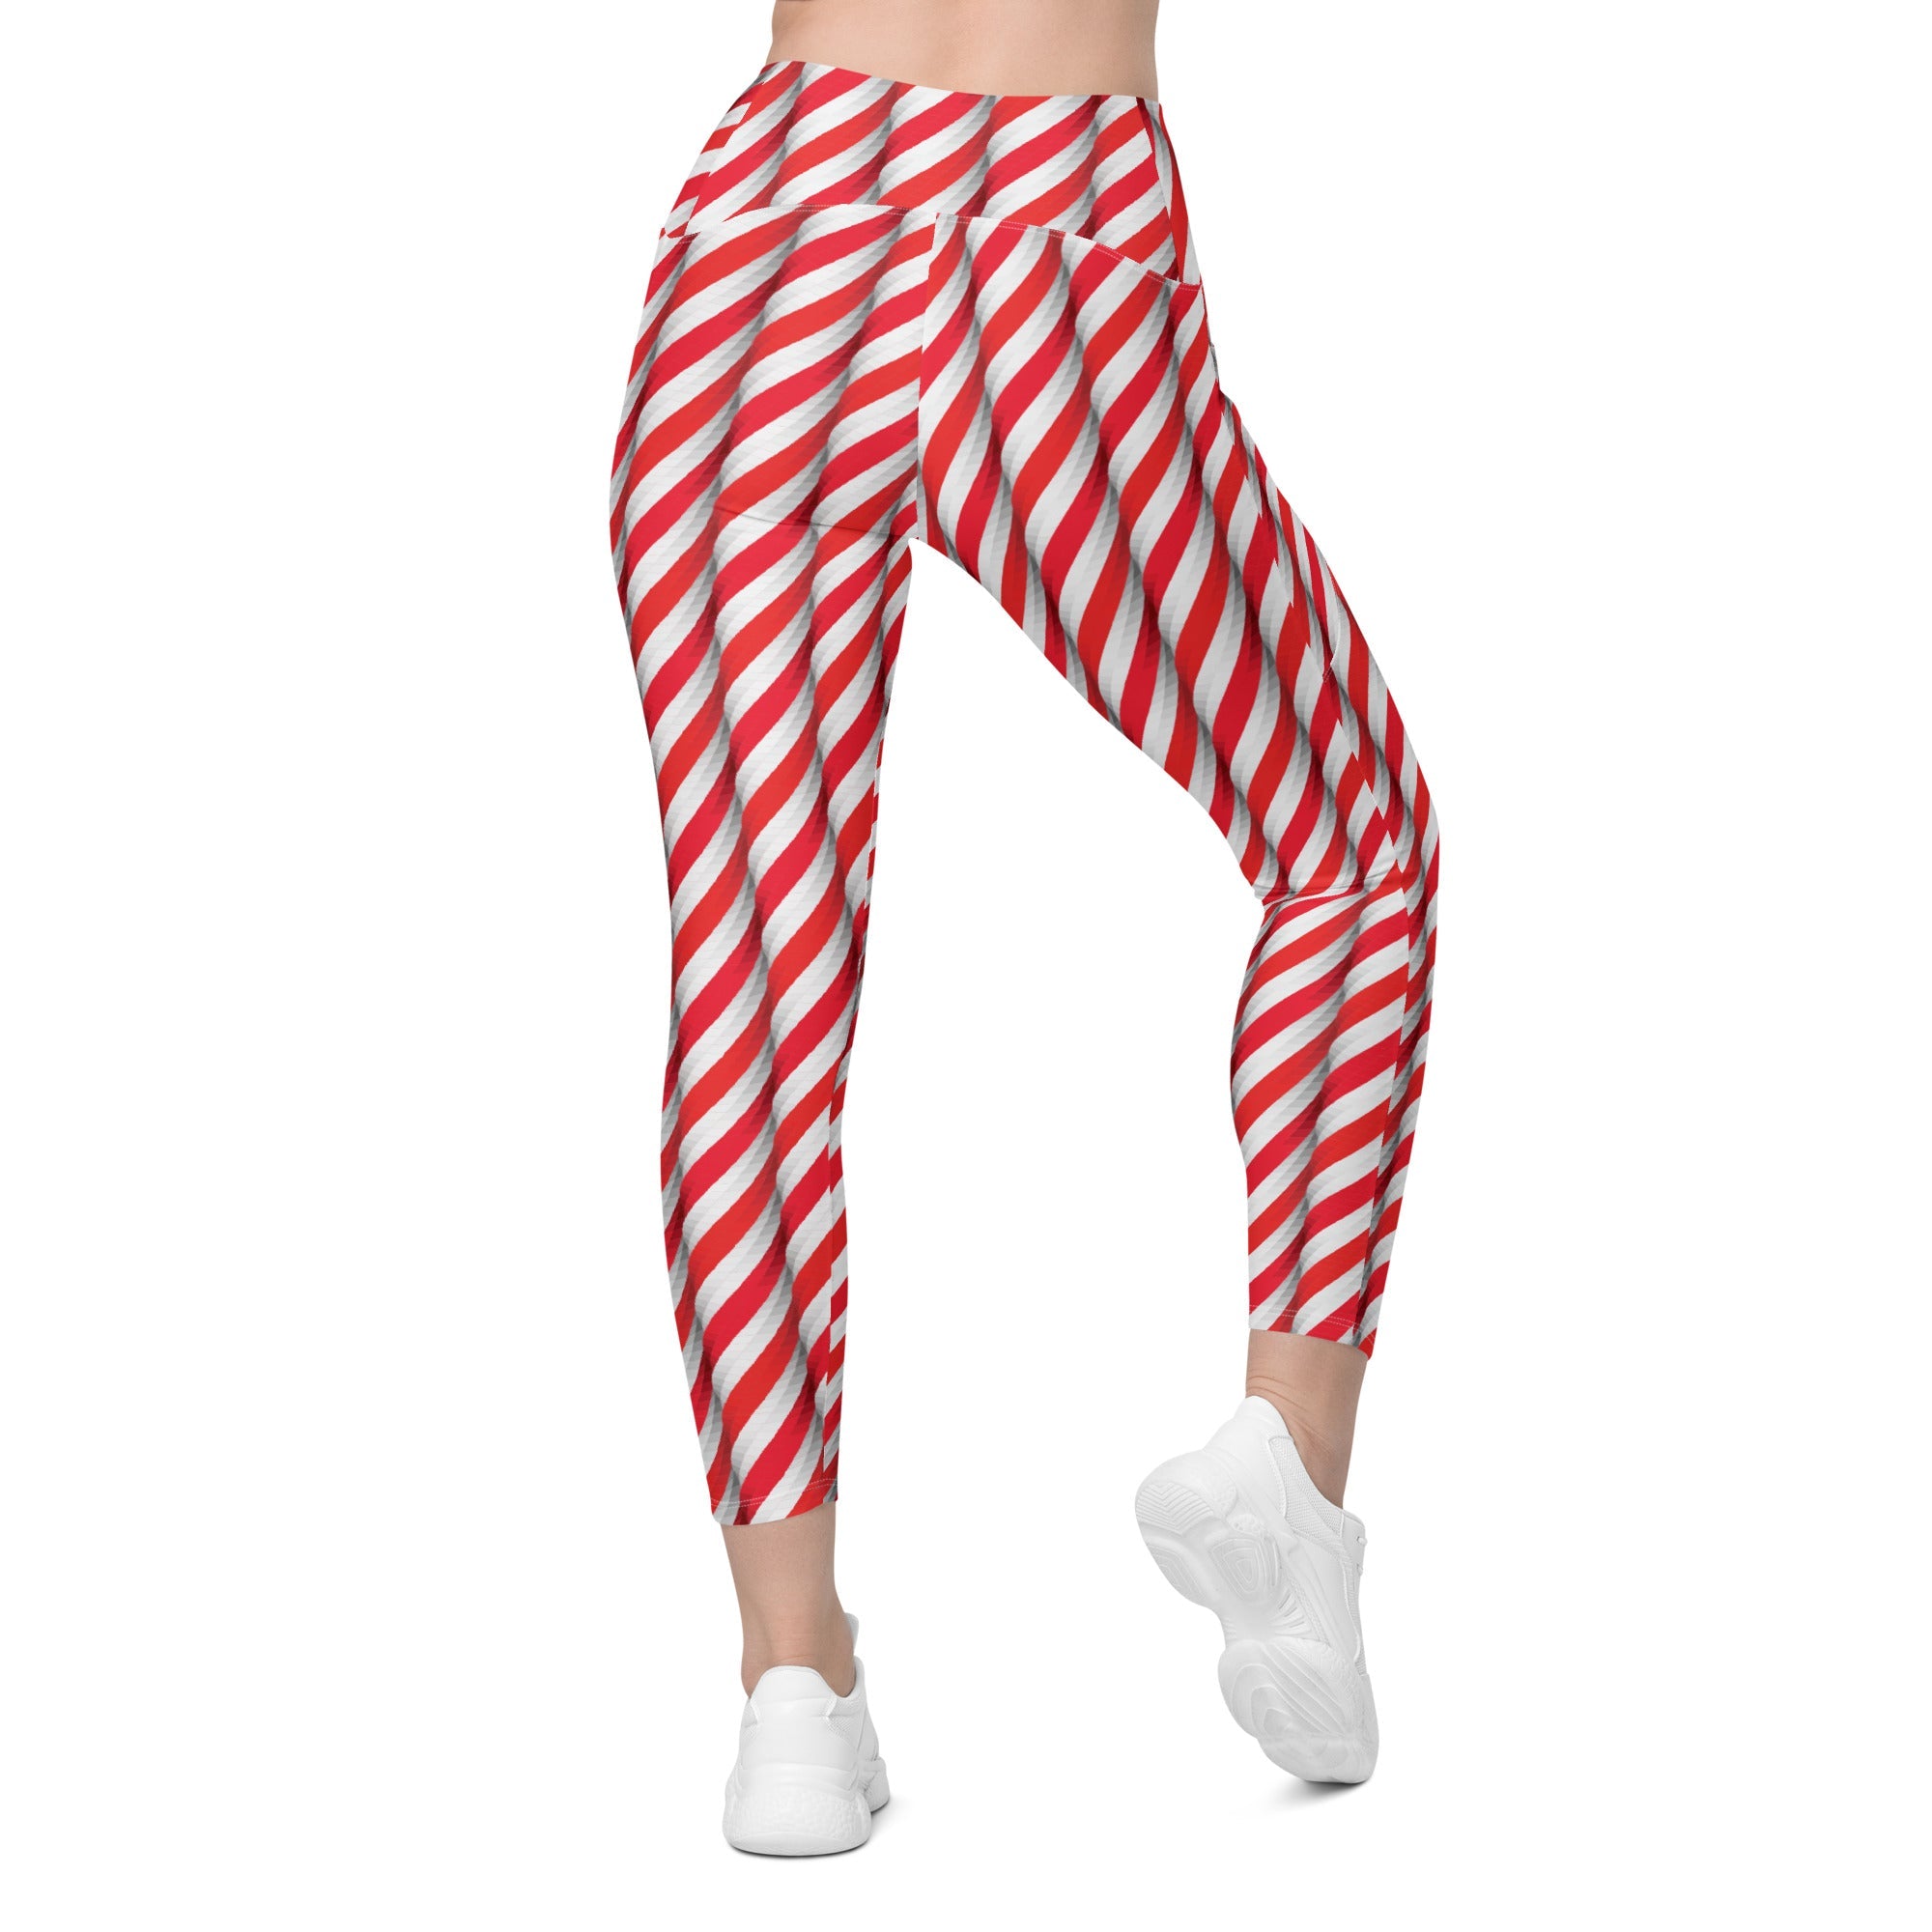 Real Candy Cane Leggings With Pockets